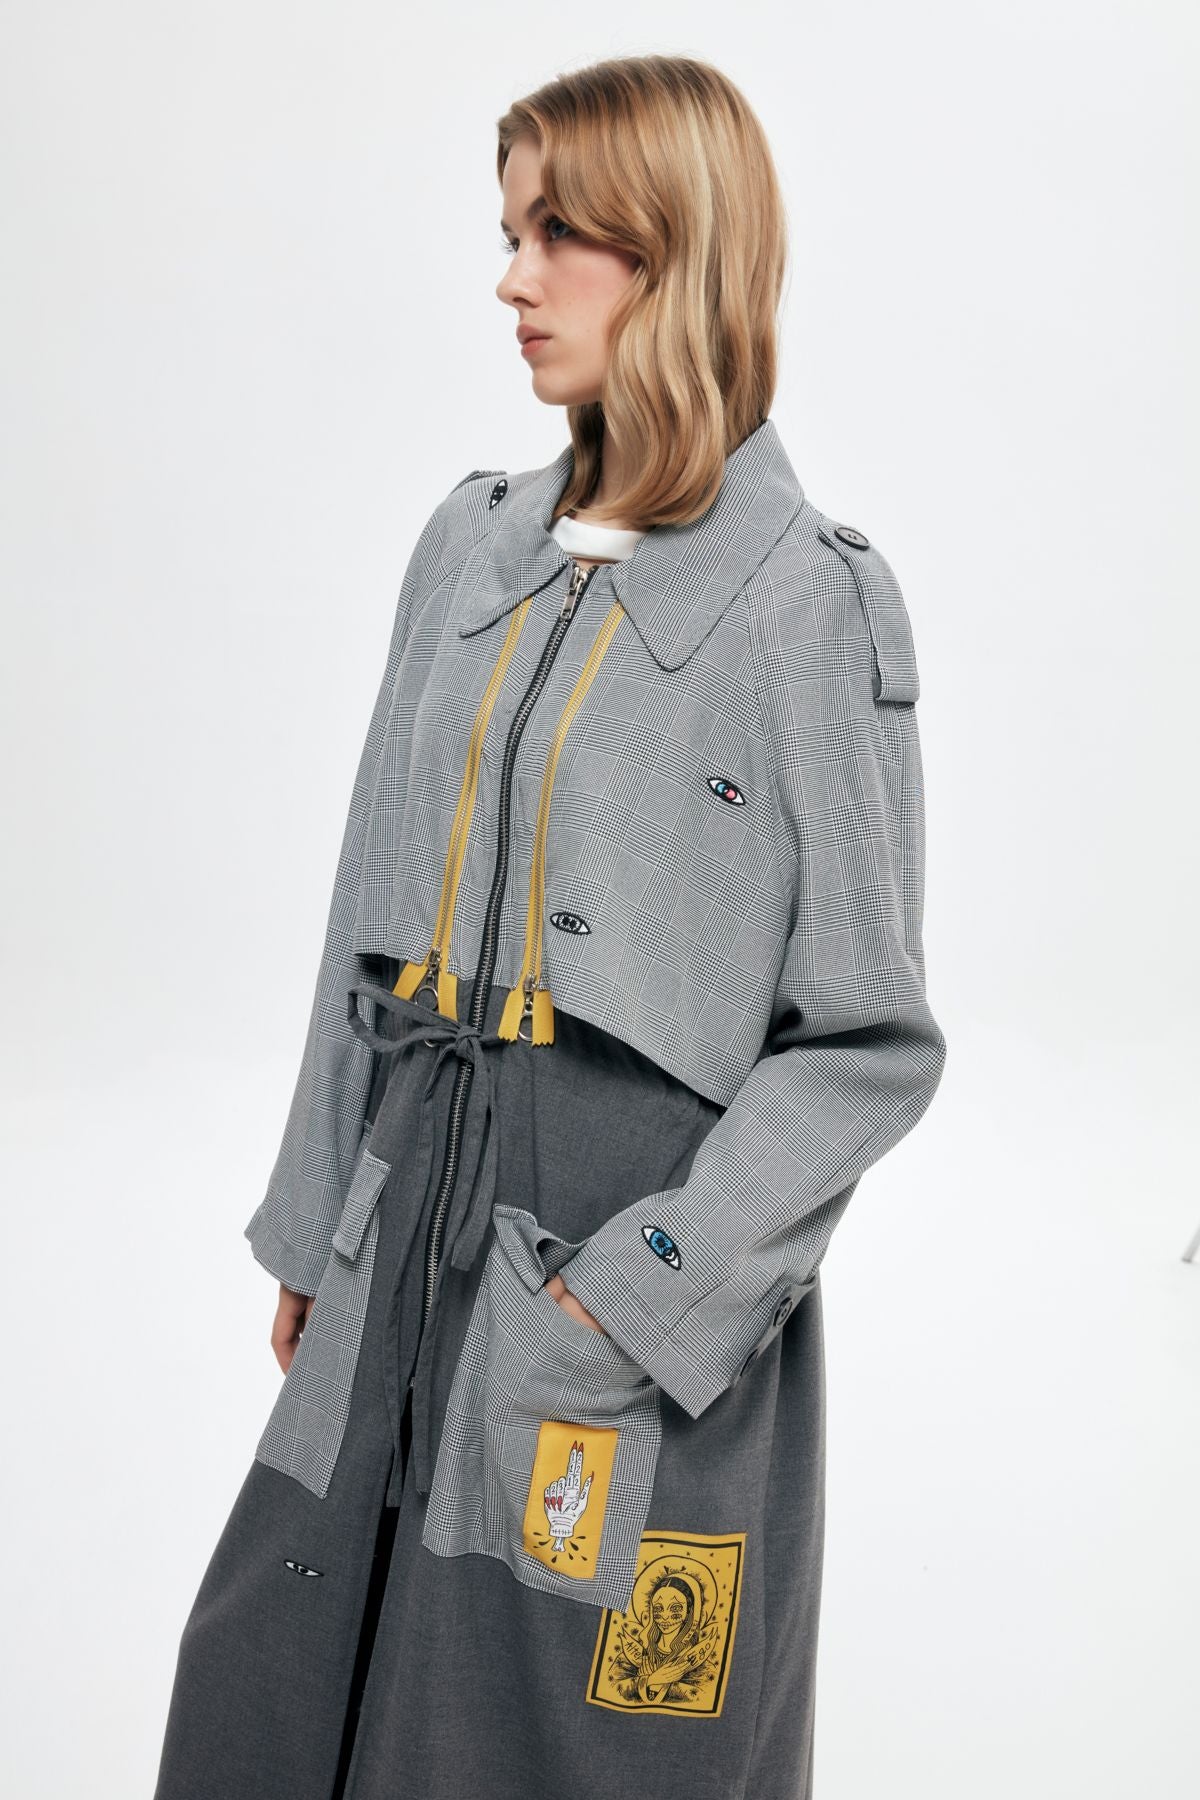 Zipper Detailed Colorful Patterned Trench Coat Gray